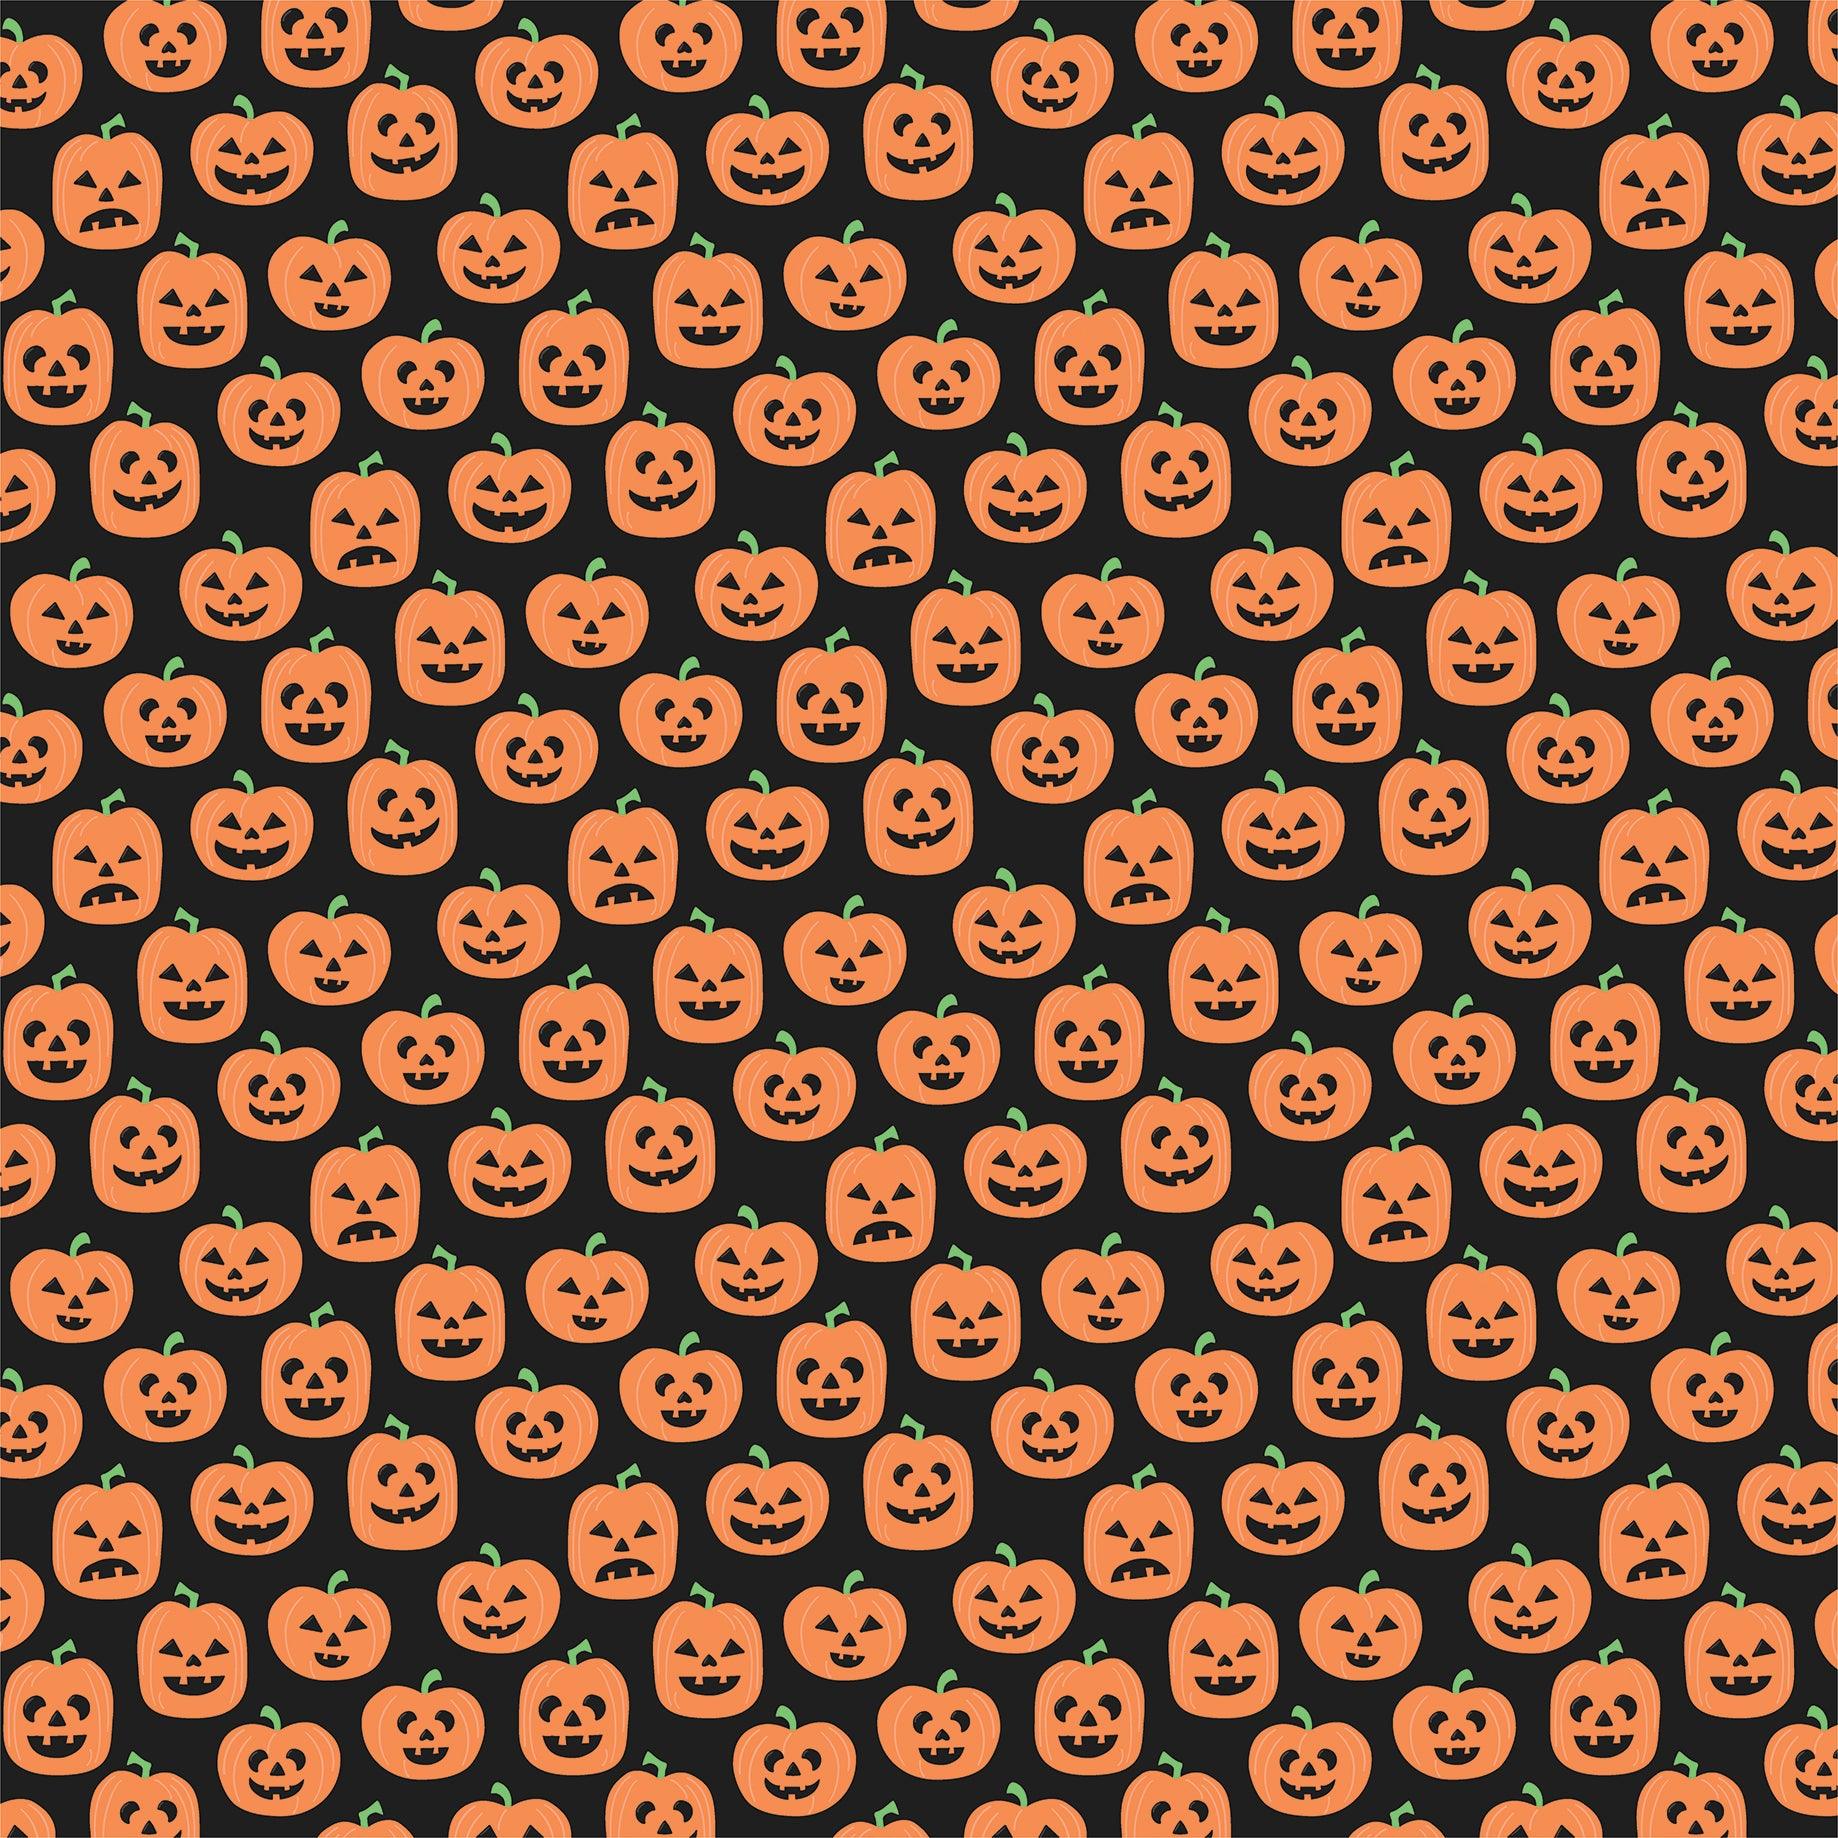 Monster Mash Collection Faces Of Halloween 12 x 12 Double-Sided Scrapbook Paper by Echo Park Paper - Scrapbook Supply Companies